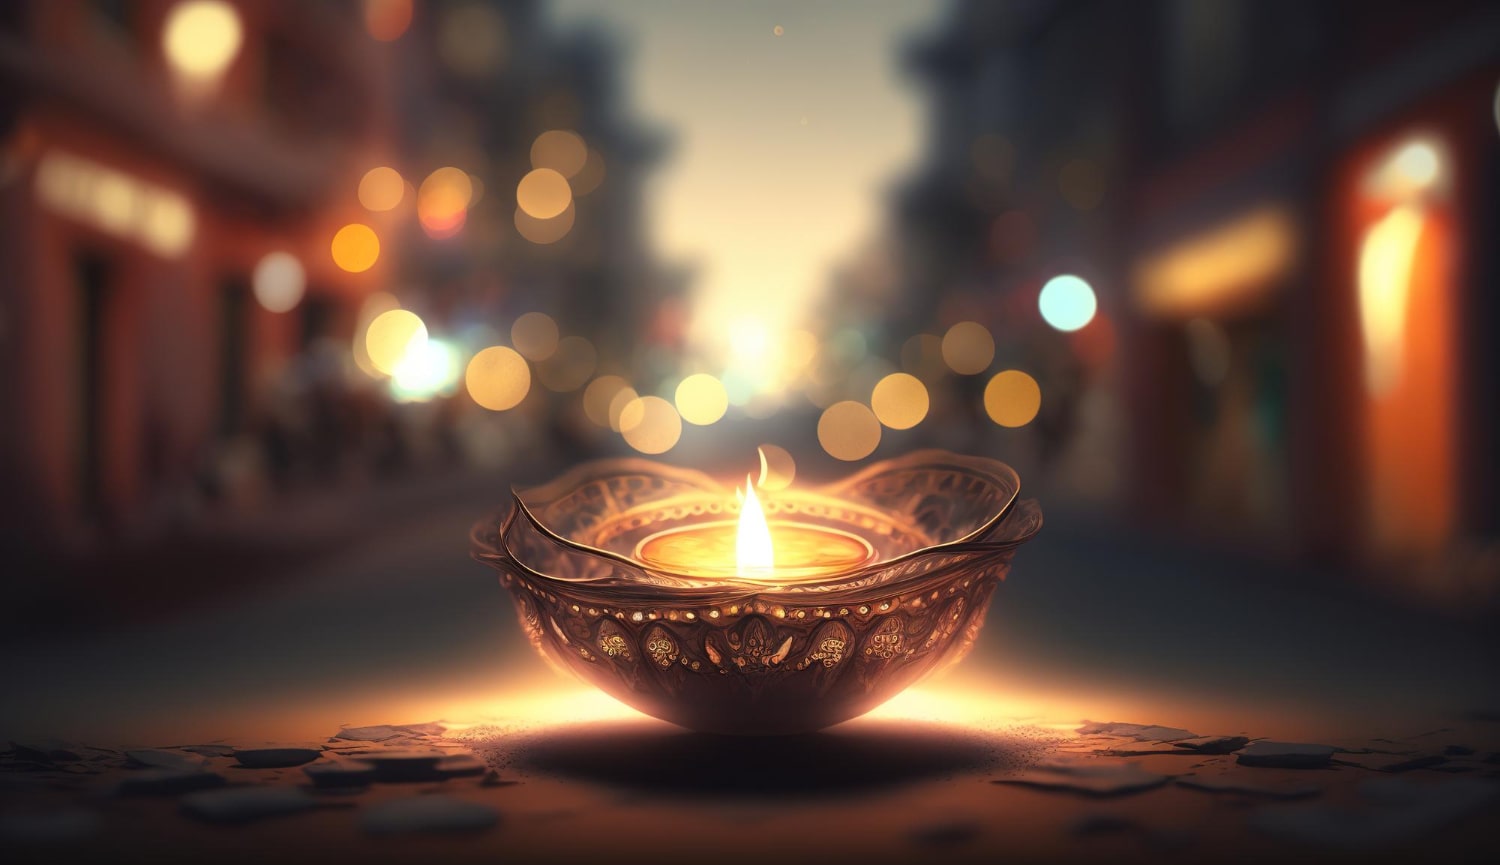 20 interesting facts about Diwali